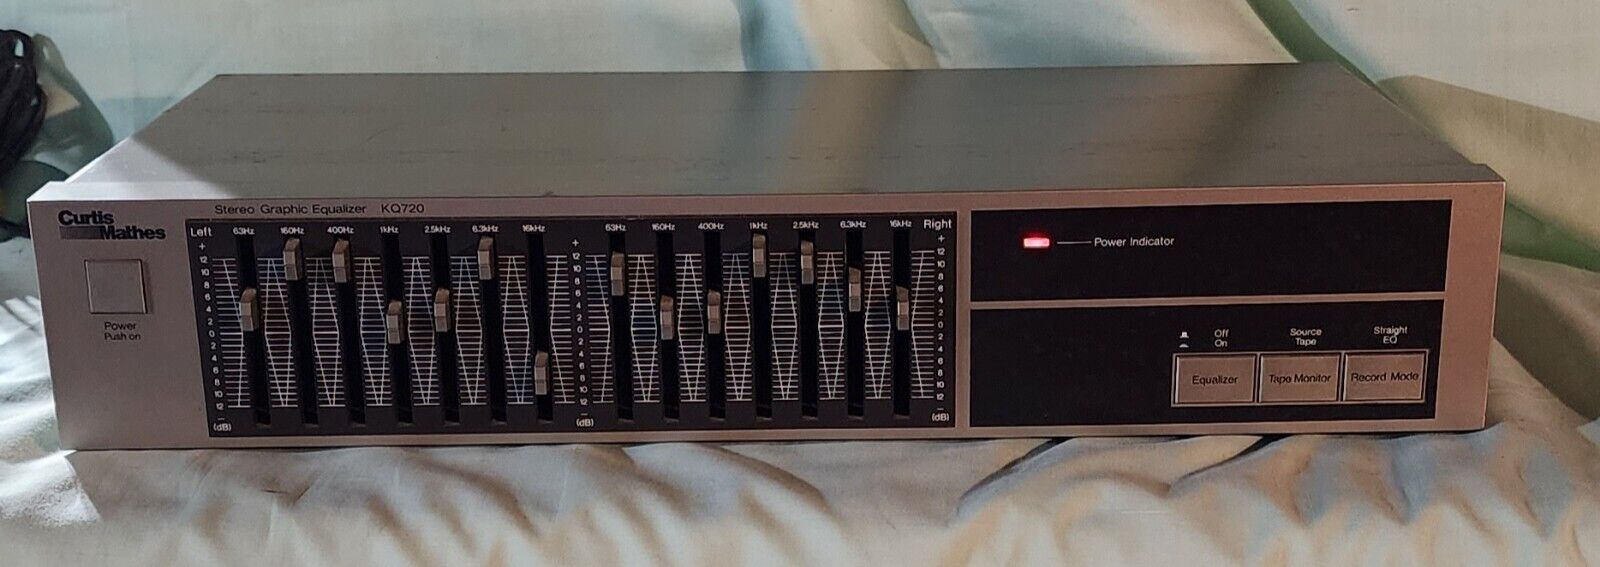 Curtis Mathes Stereo Graphic Equalizer Model KQ720 LIGHTS UP